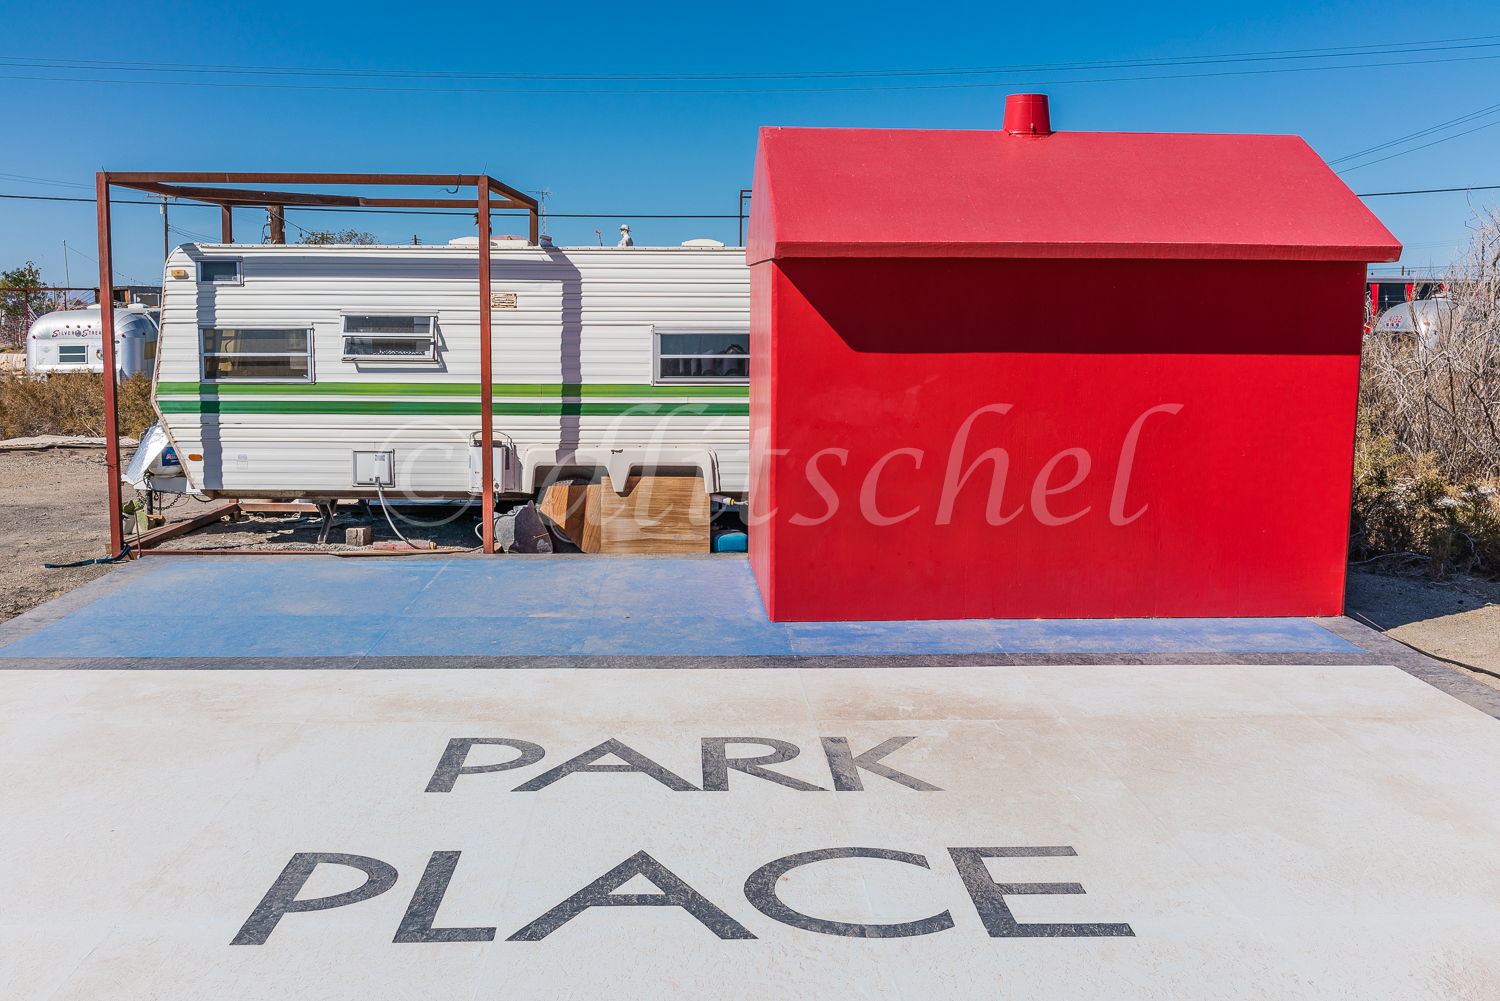 A life-sized Monopoly hotel on a concrete pad with {quote}Park Place{quote} painted on the pad in Bombay Beach, California.